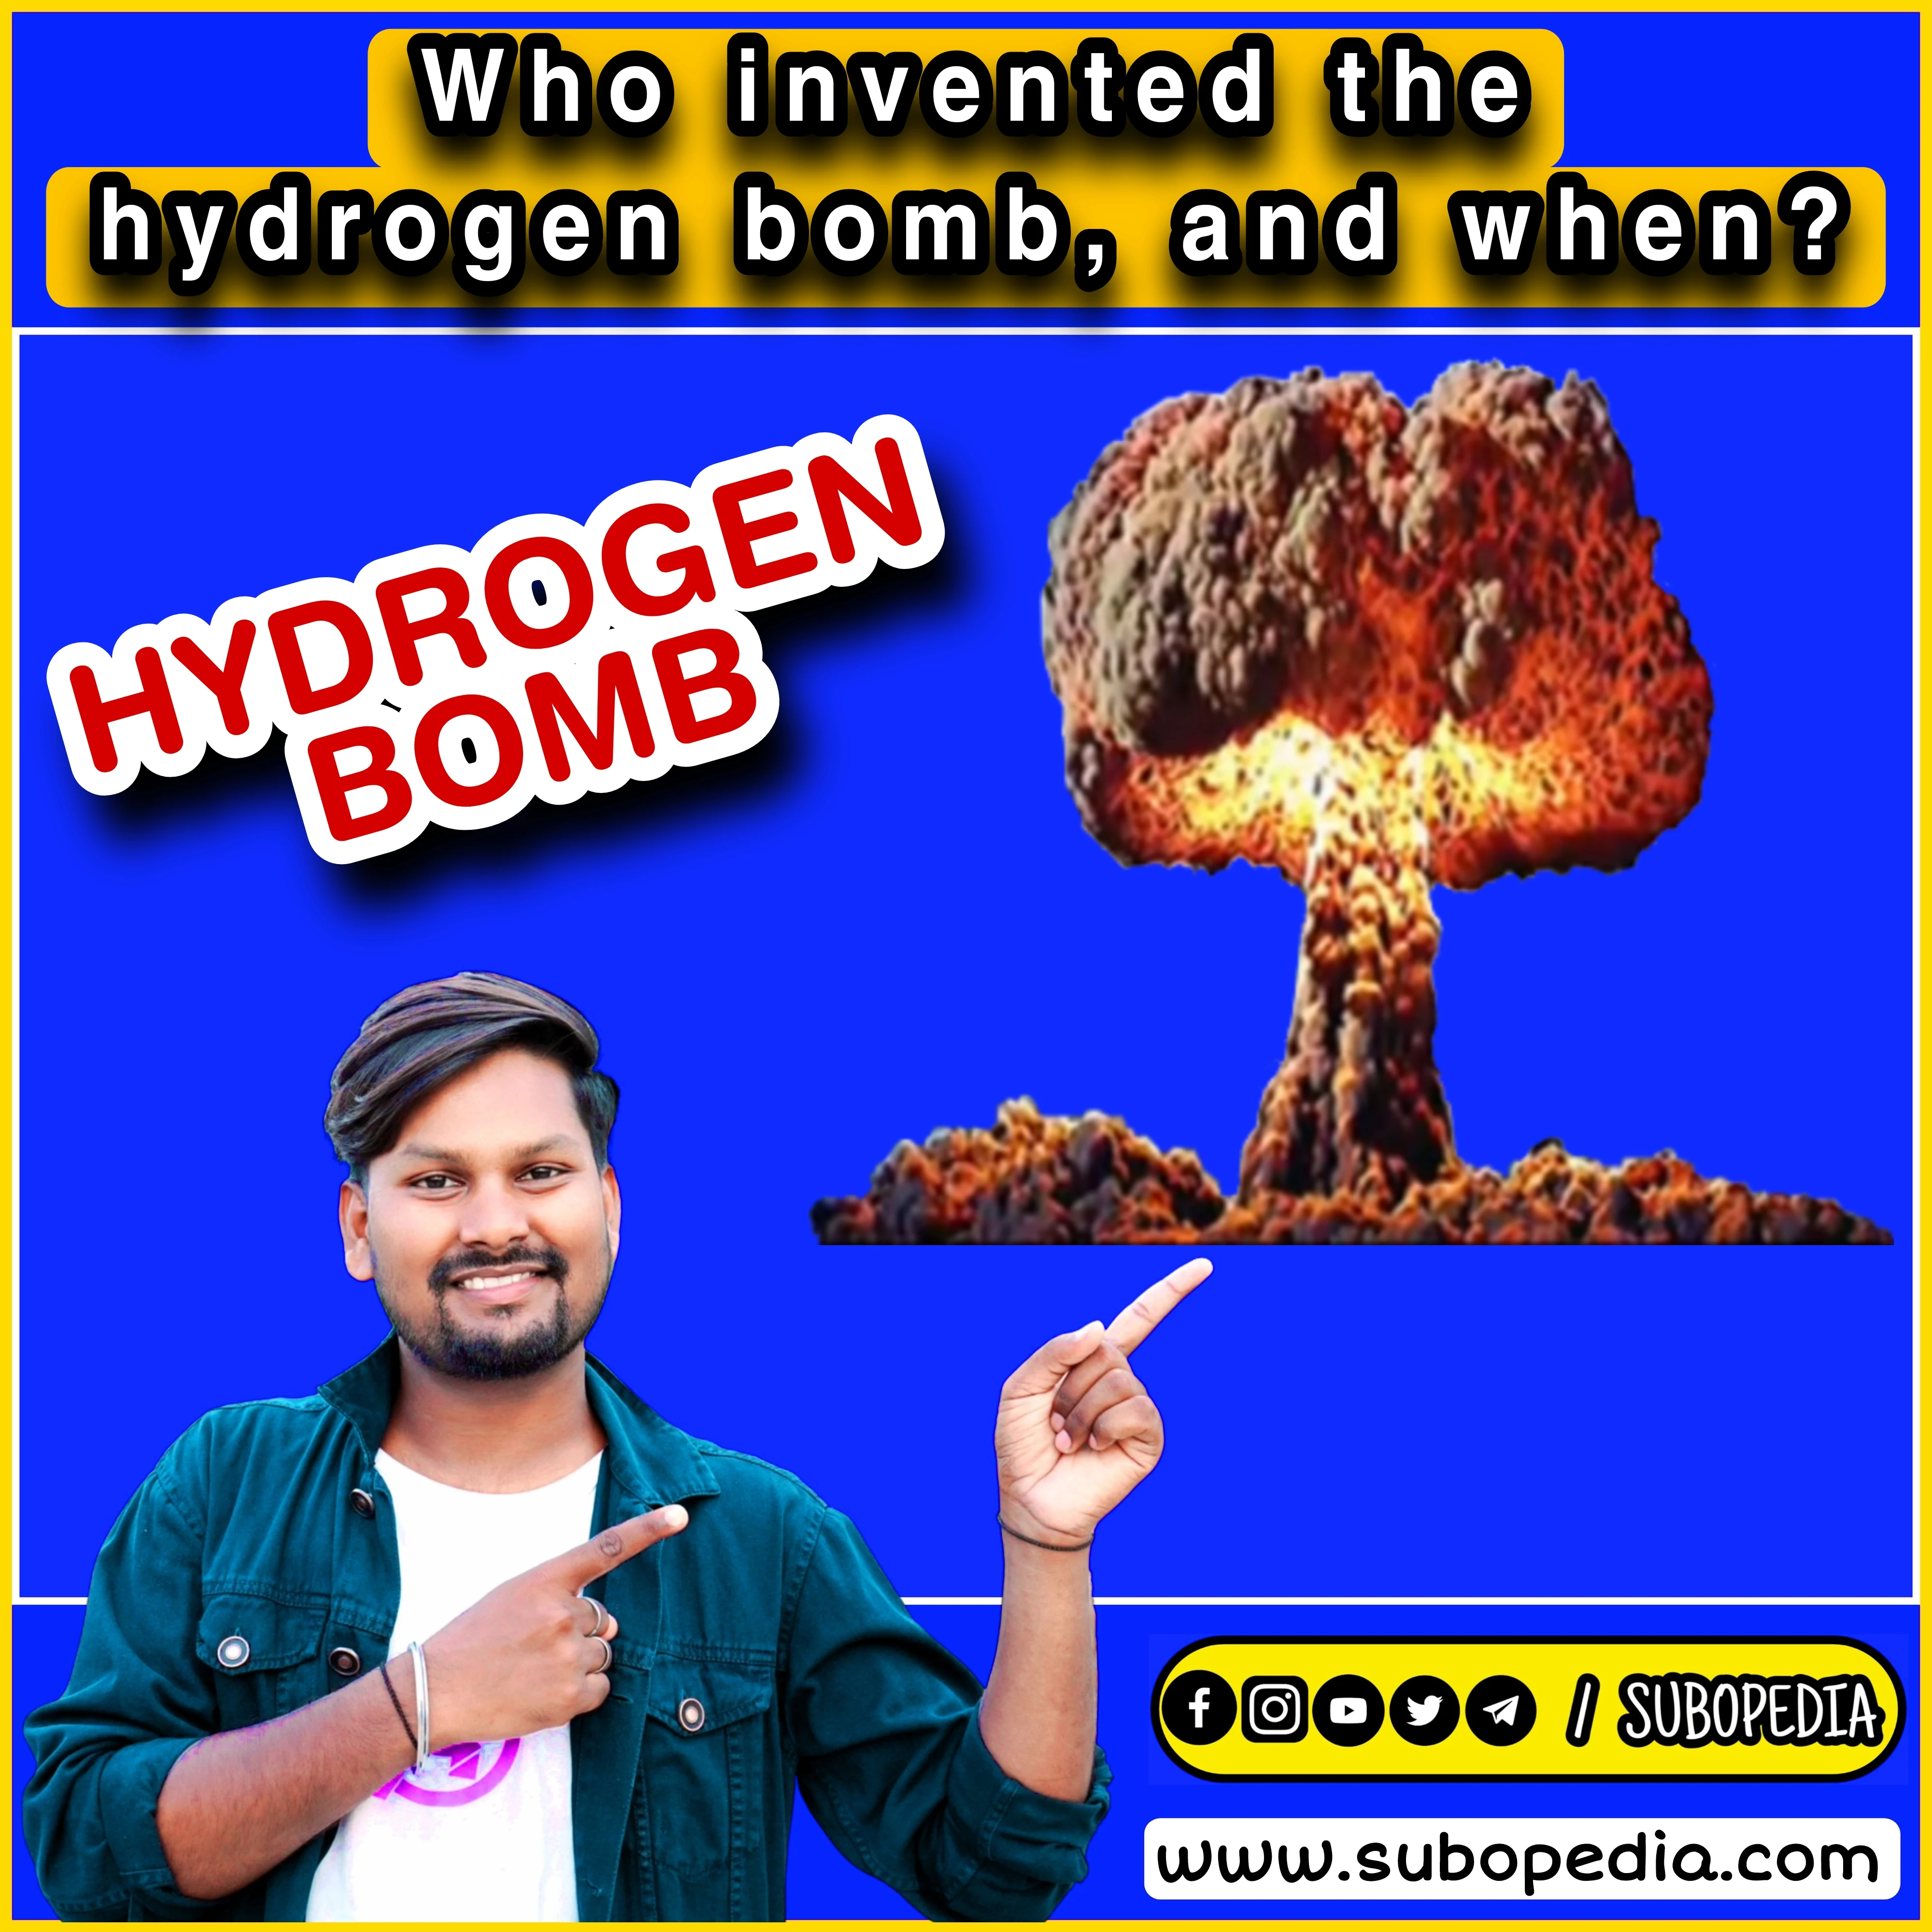 Who invented the hydrogen bomb, and when?